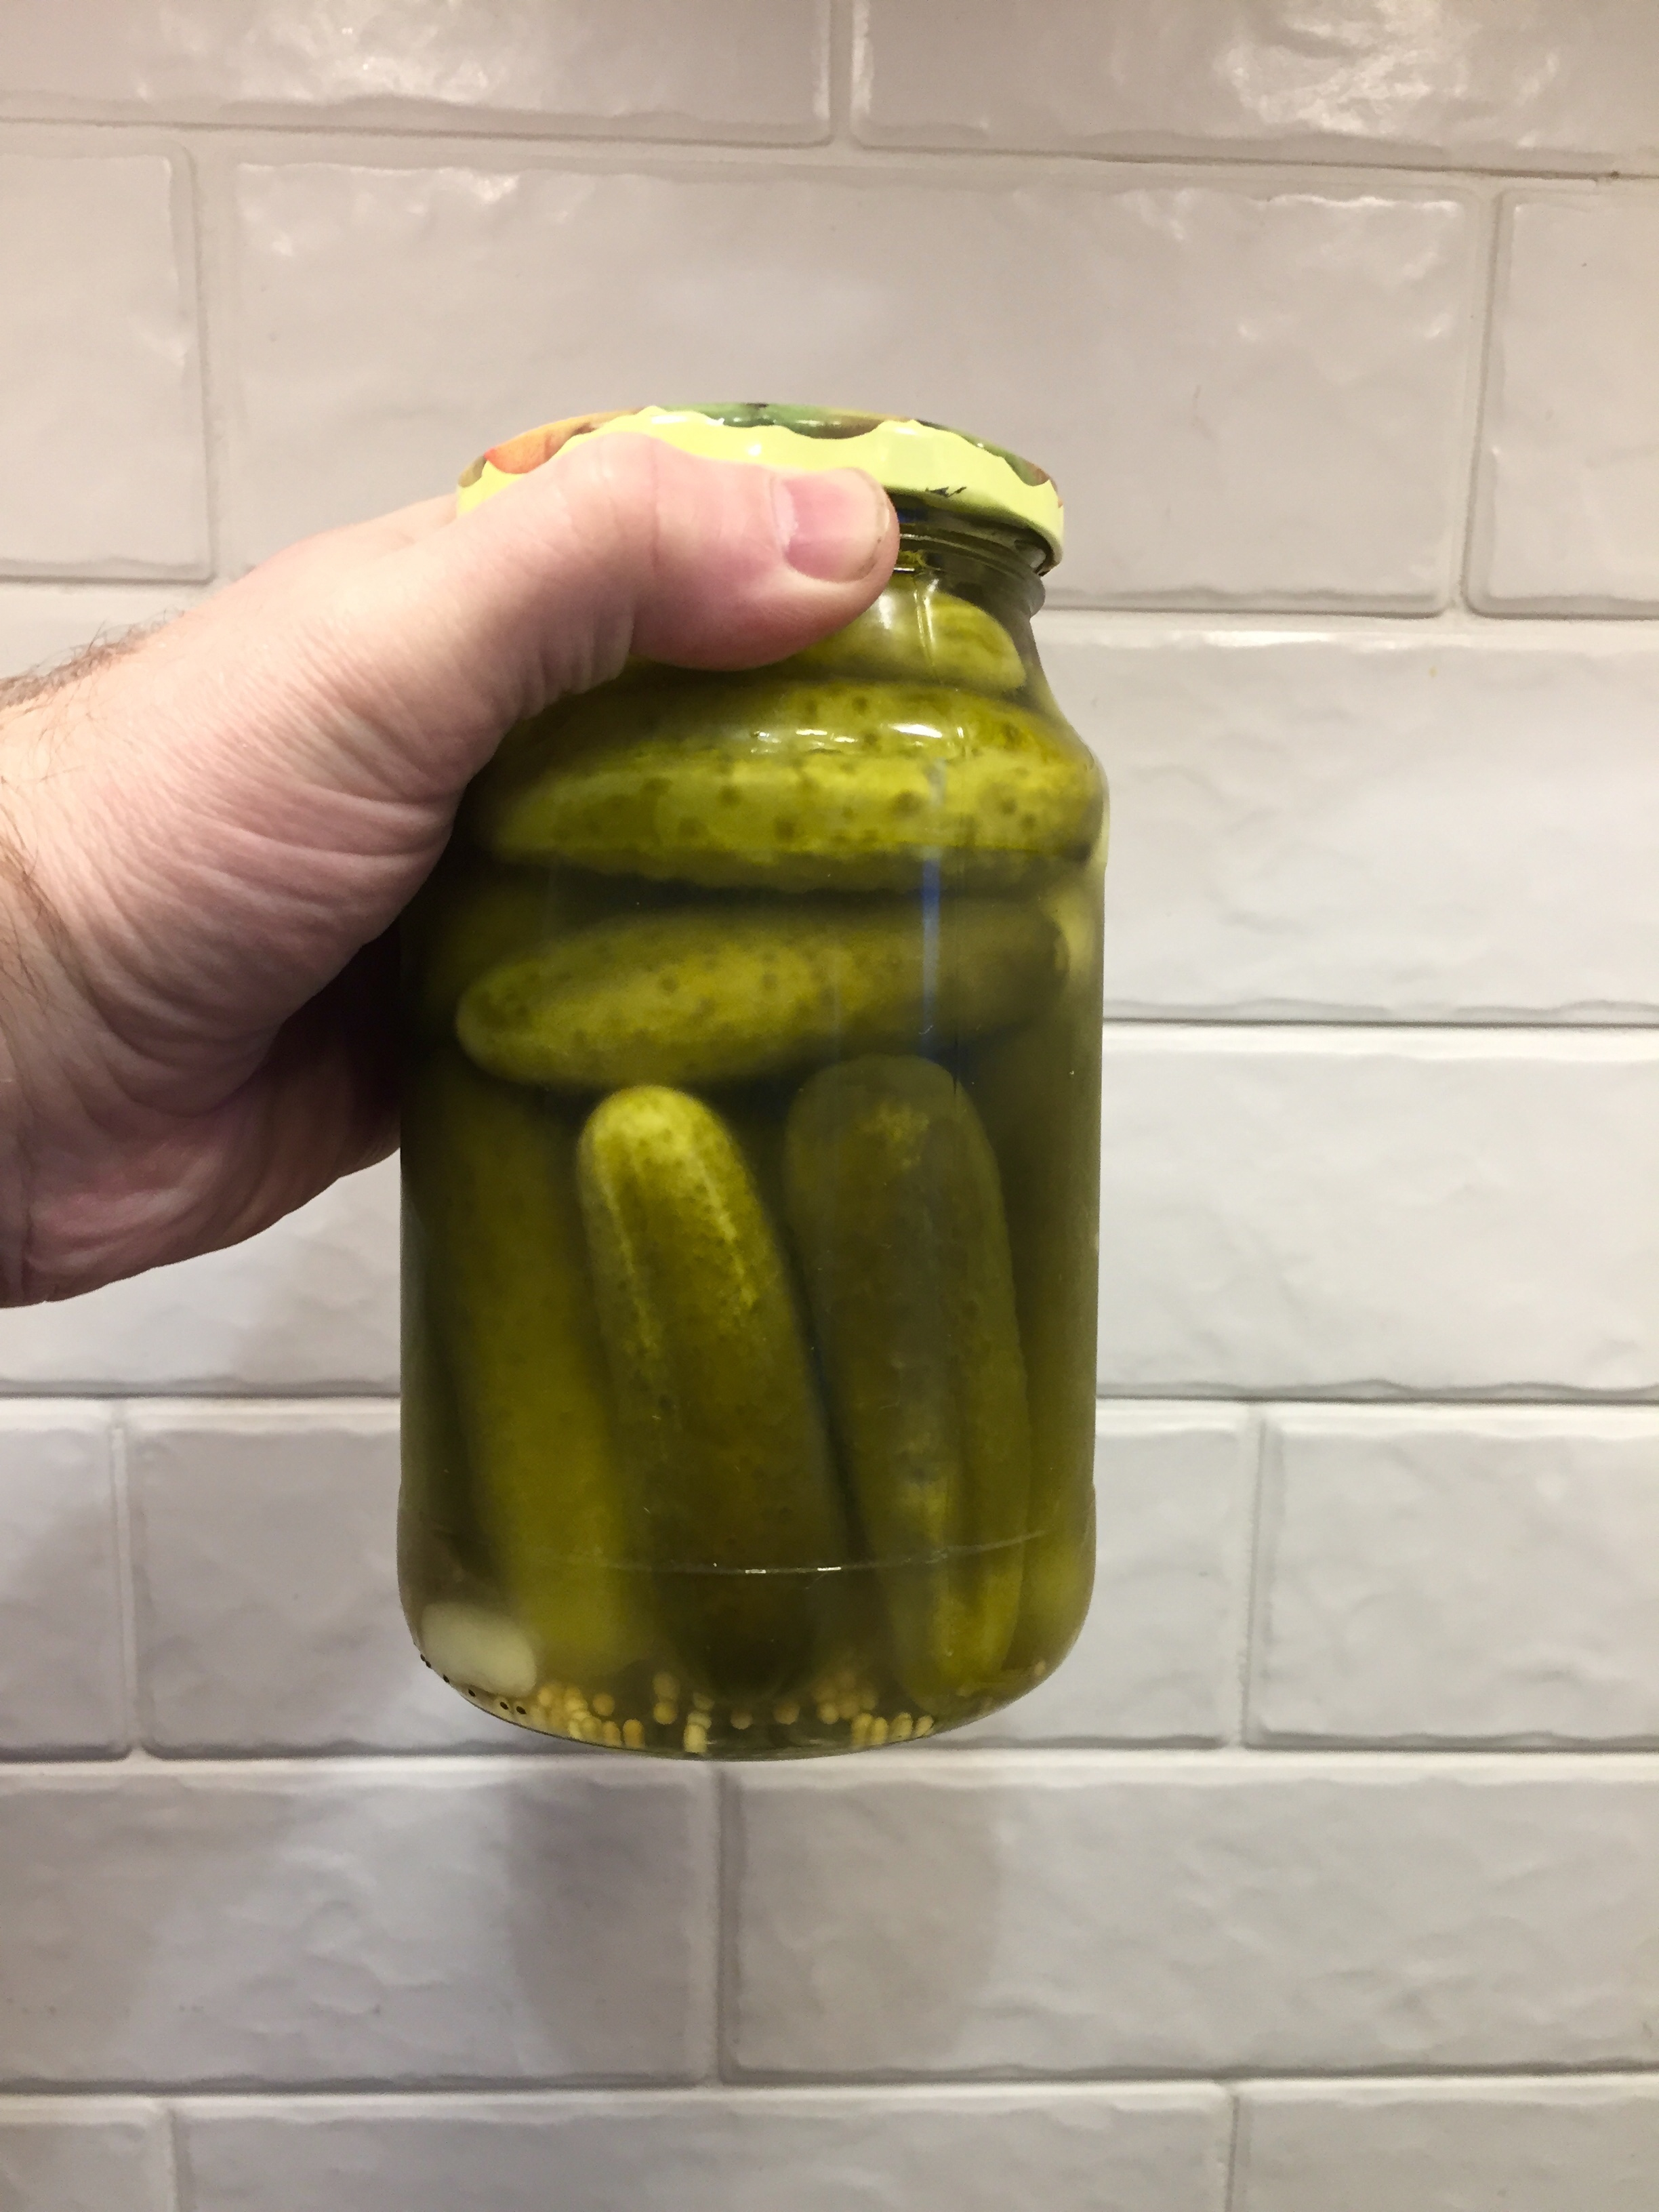 Hand holding a jar of pickles against a tiled background